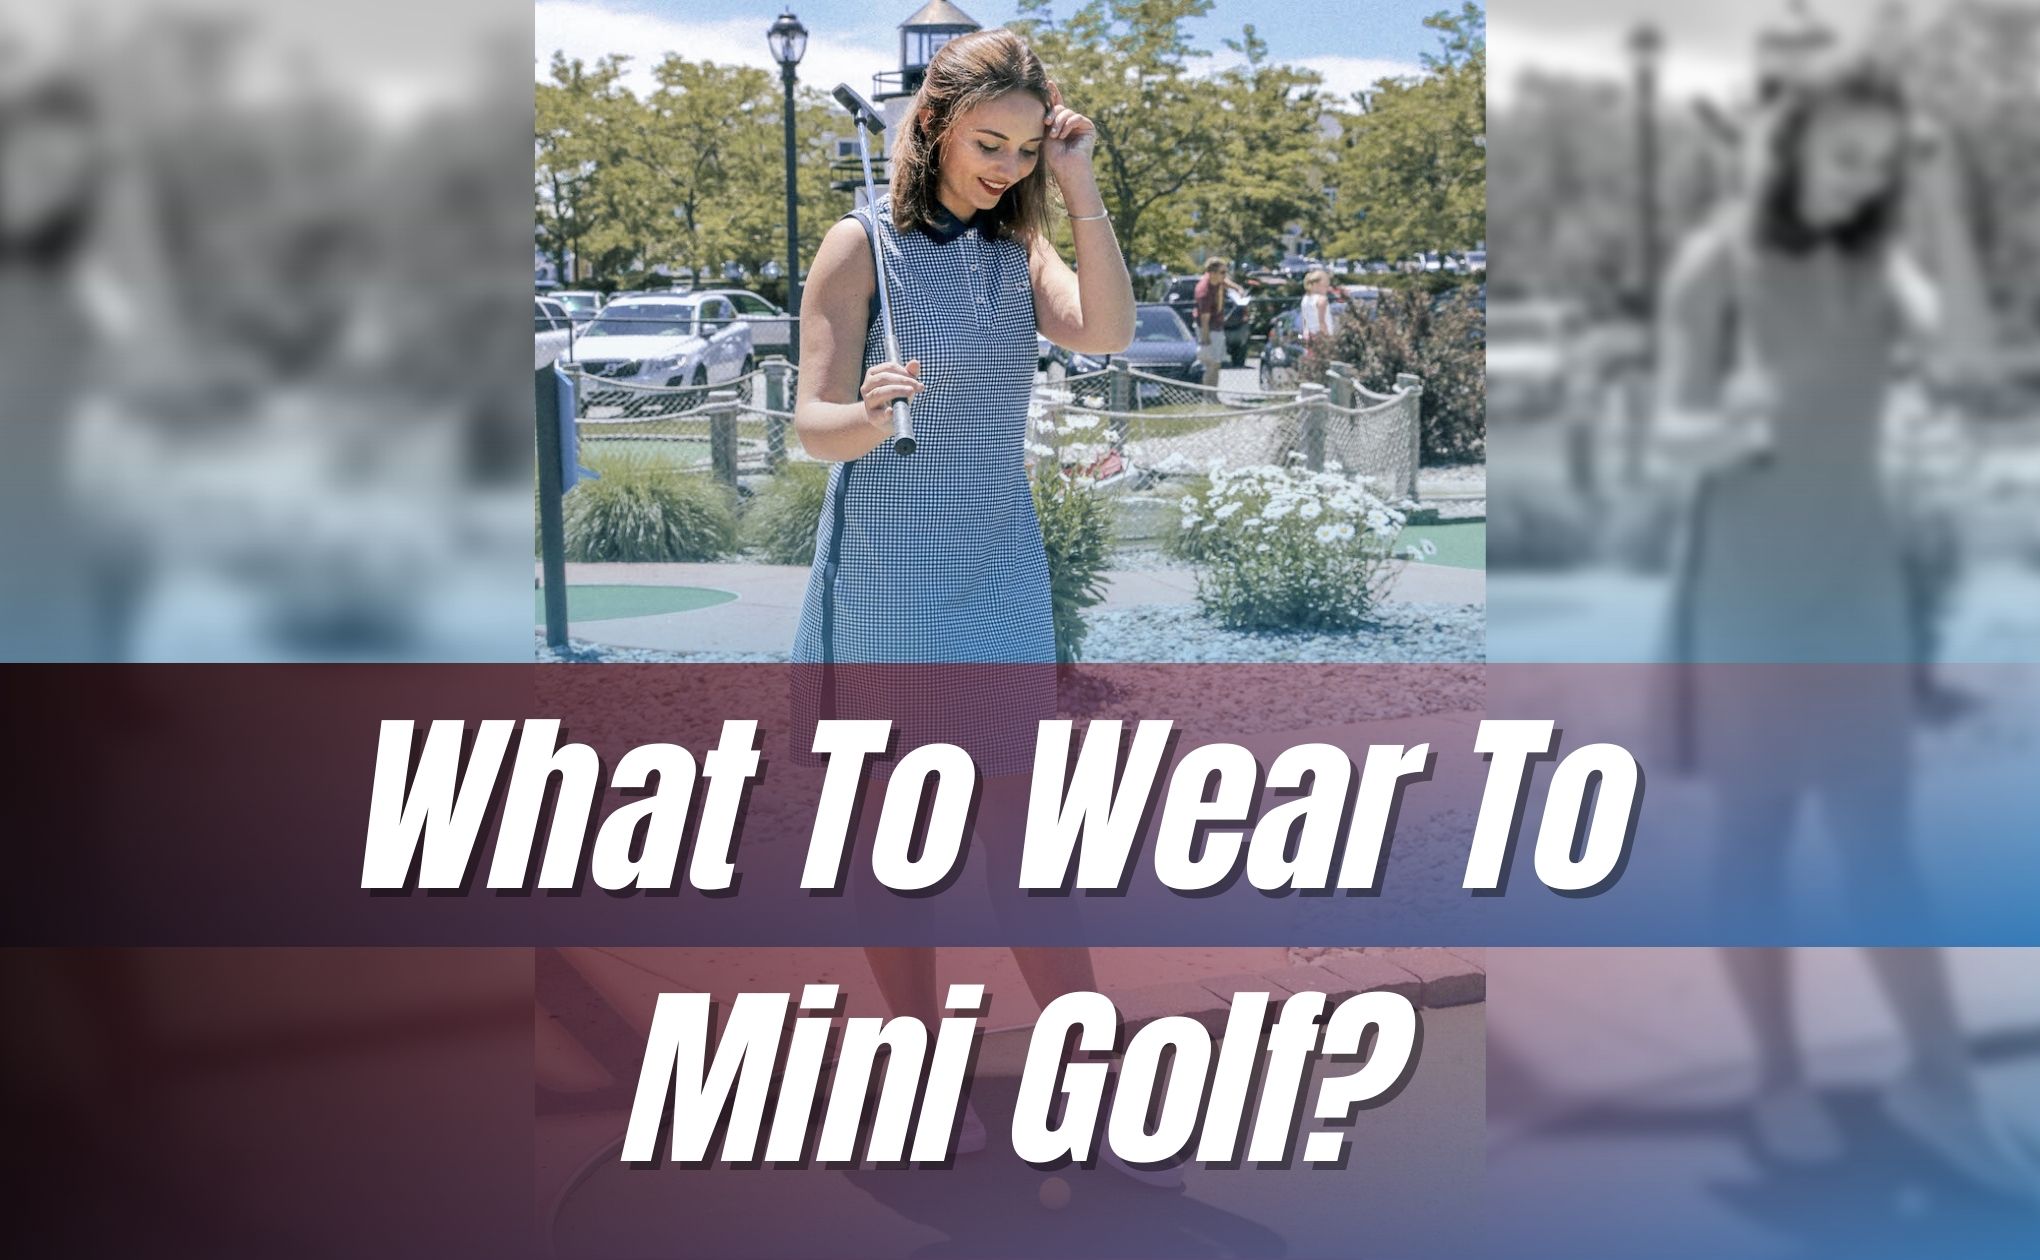 What To Wear To Mini Golf